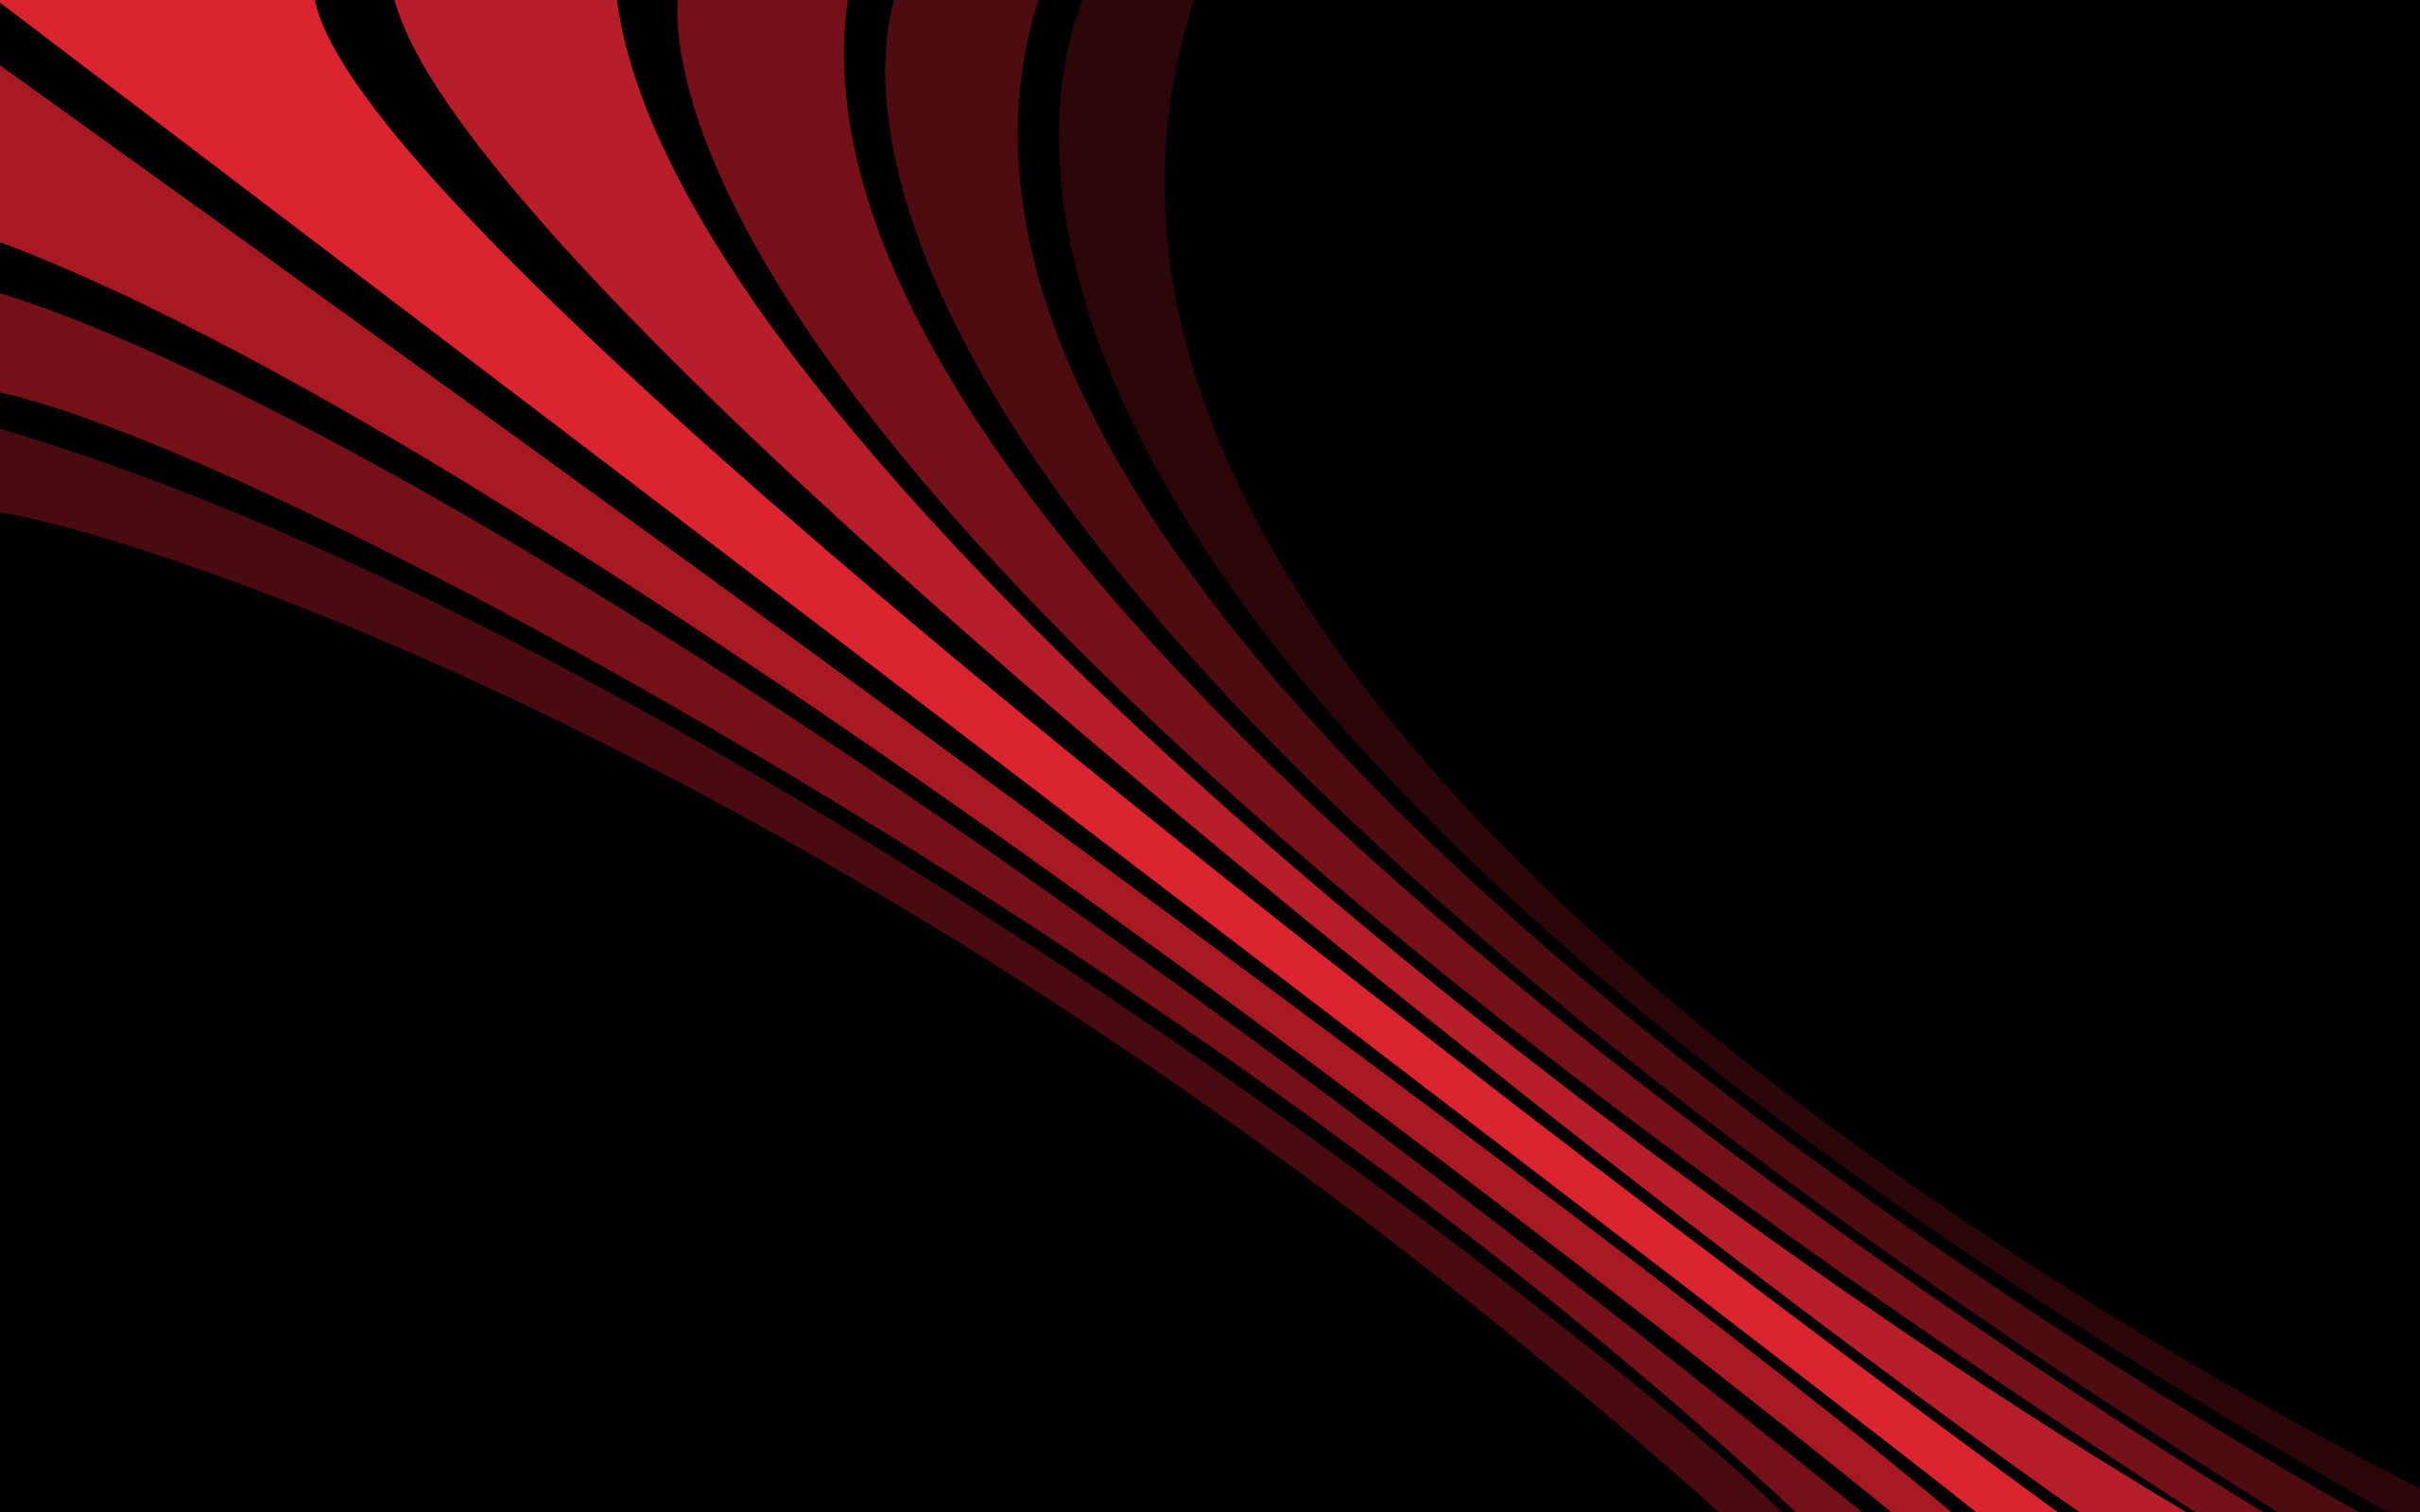 2560x1600 Cool Red And Black Desktop Background 1 Free Hd Wallpaper Wallpaper #6038